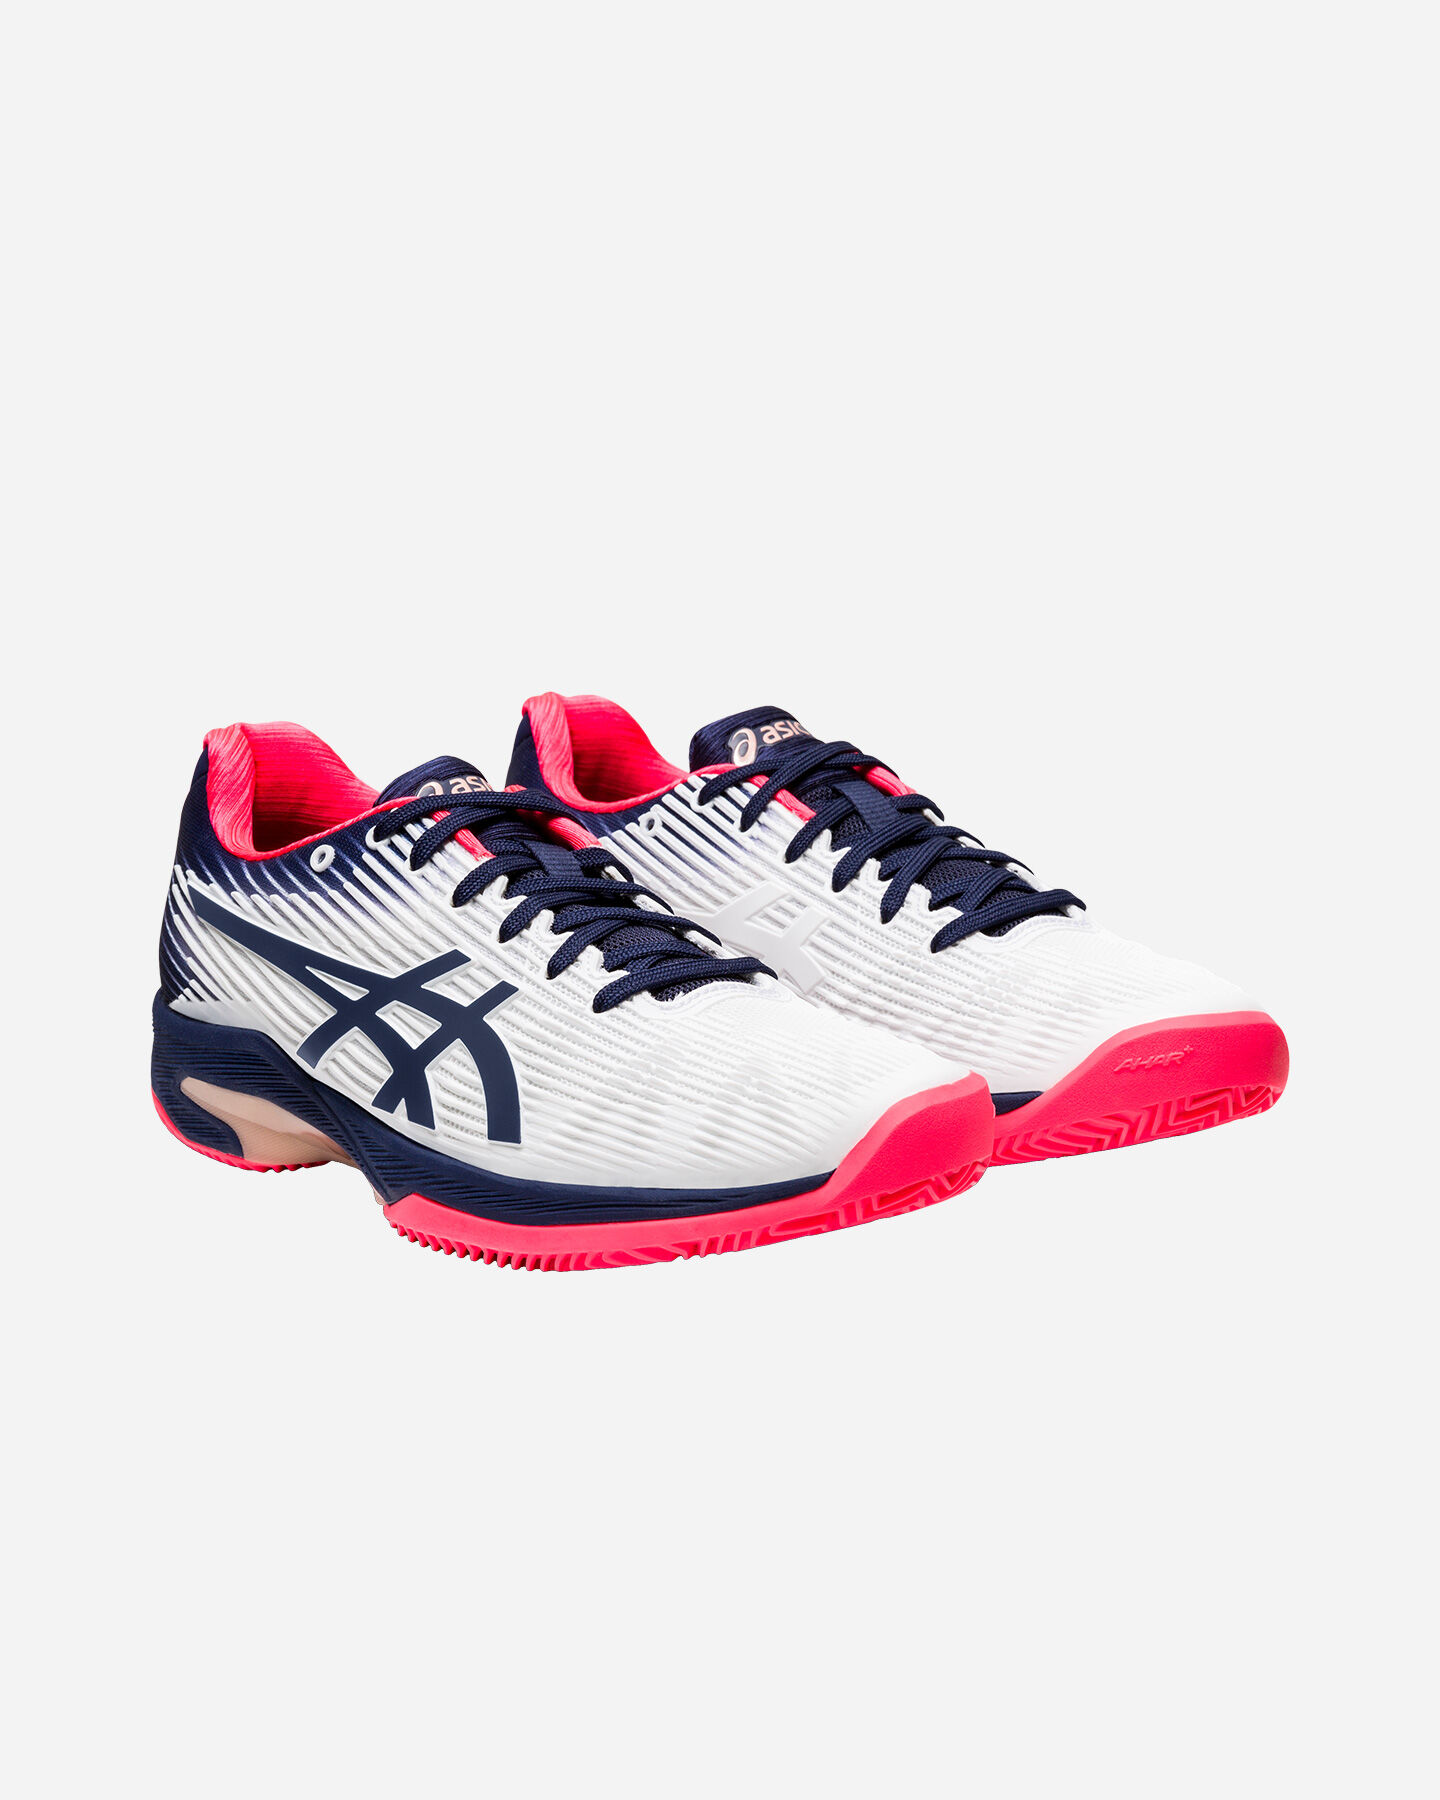  Scarpe tennis ASICS SOLUTION SPEED FF CLAY W S5159468|102|5 scatto 1